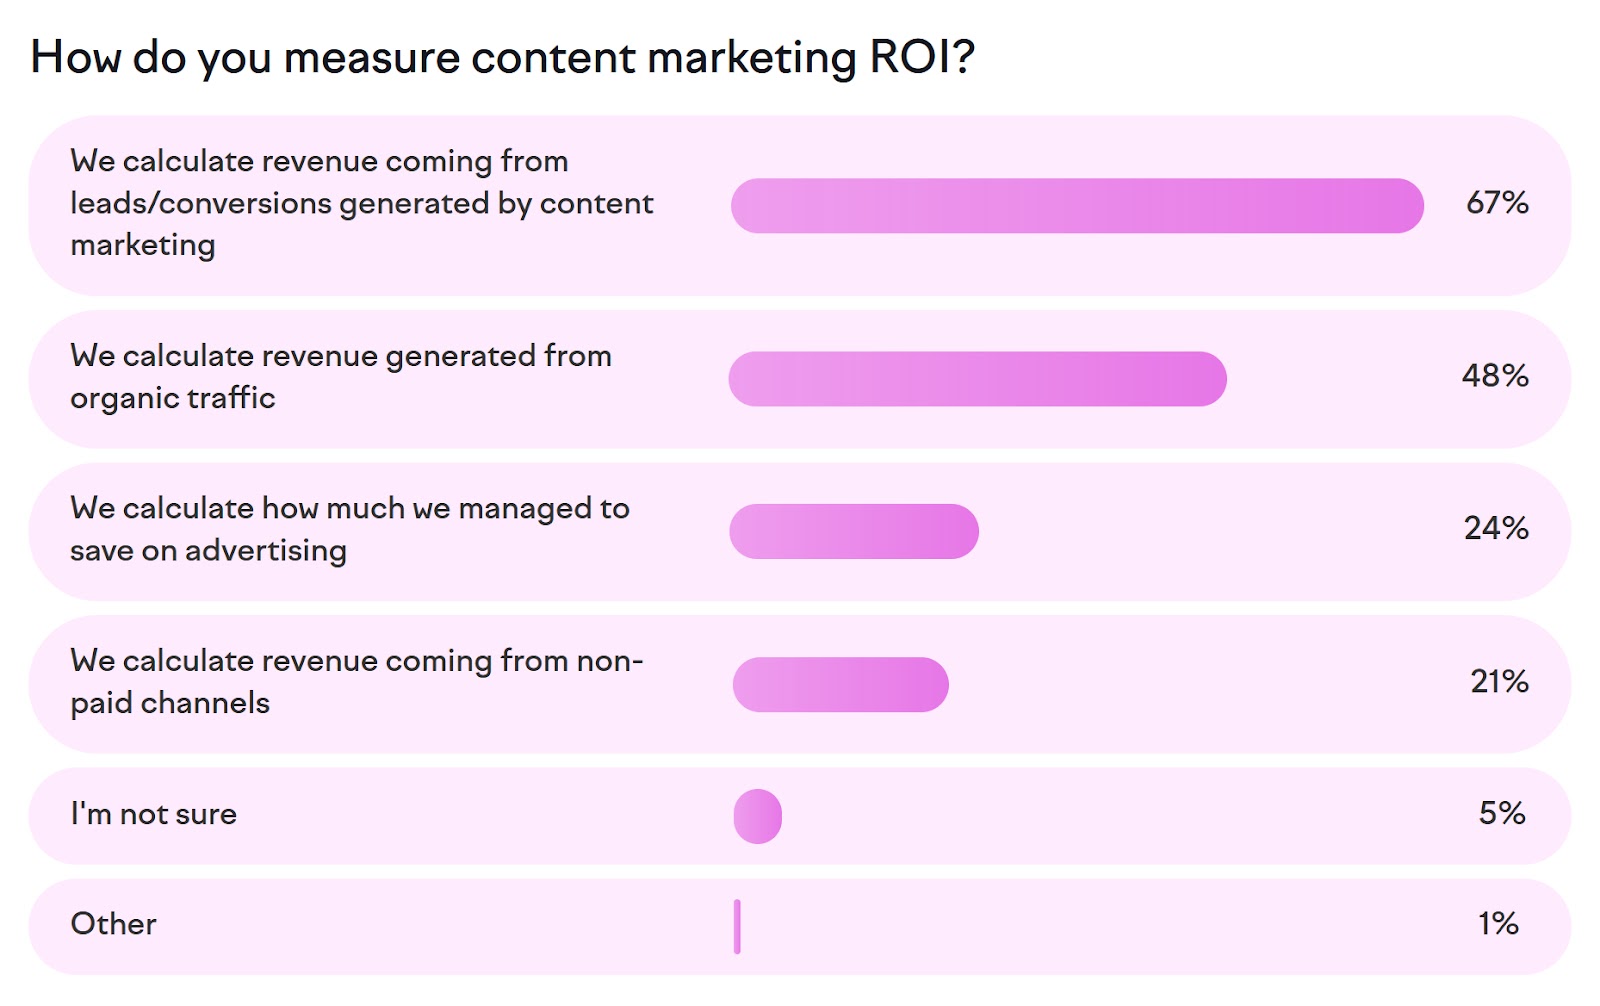 Answers to "How do you measure content marketing ROI?" from State of Content Marketing Report